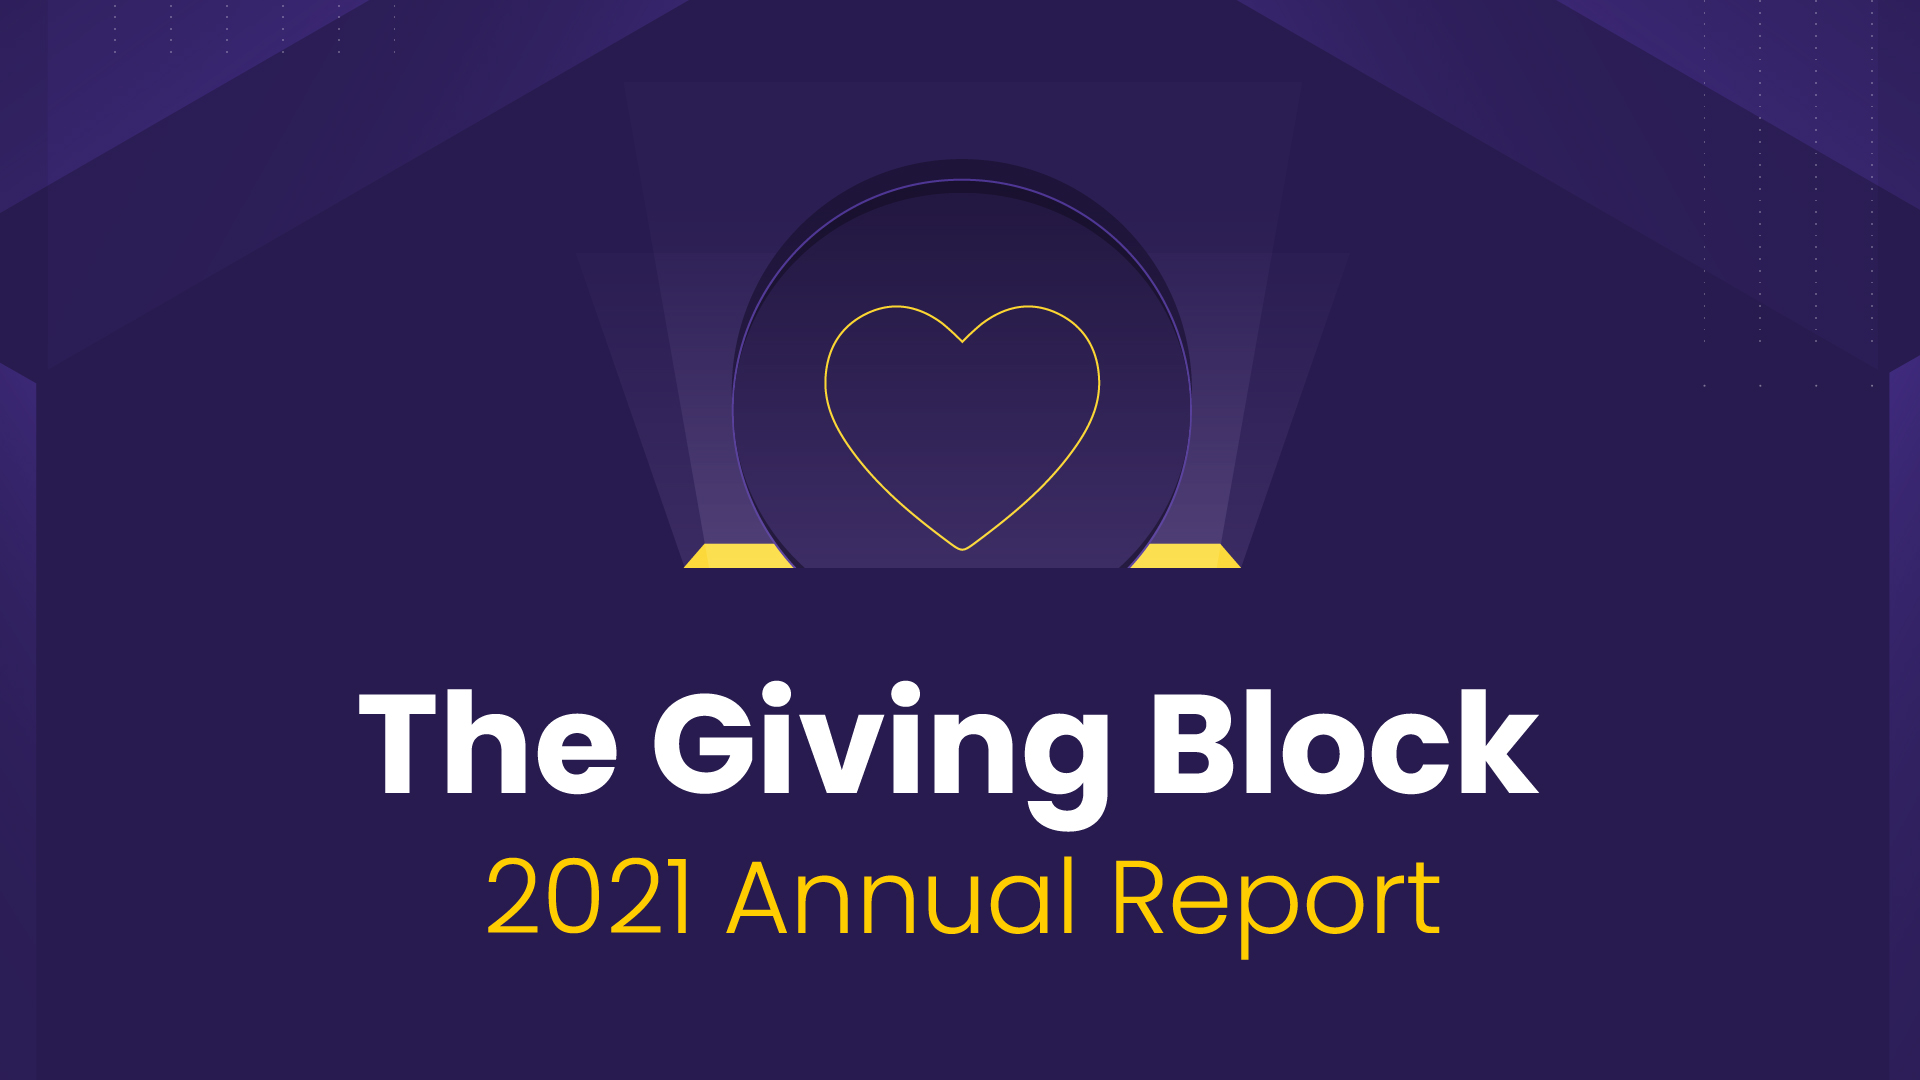 The Giving Block 2021 Annual Report